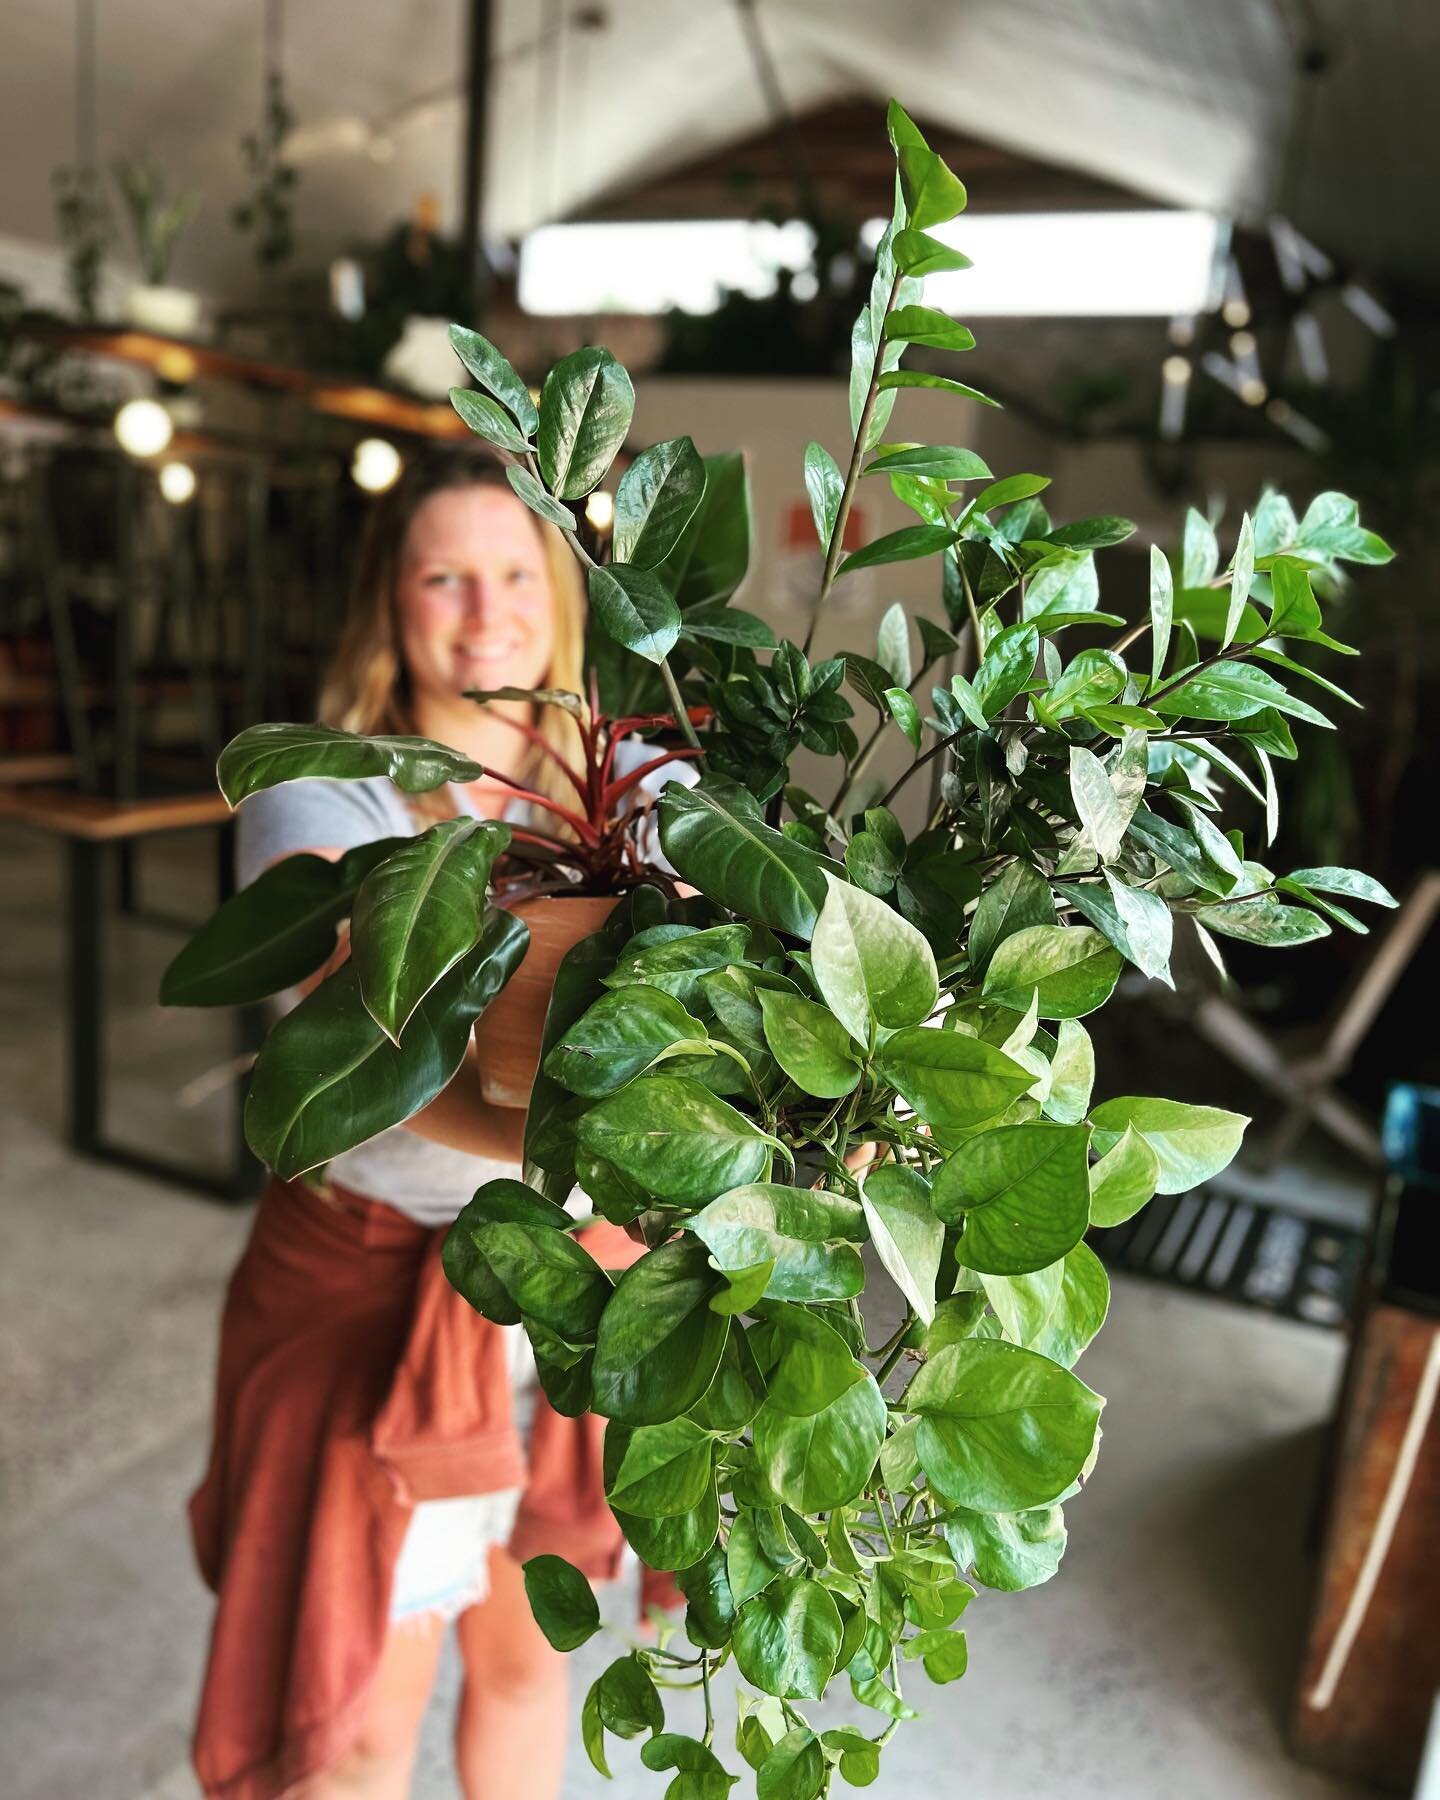 Happy Earth day! 🌳

We are celebrating Mother Earth tomorrow (Sunday) with our 🌿 plant swap 🌿 come gather with all plant enthusiasts from 1-4 pm. 

🌿 bring your own jar/container to transport your new babies 
🌿 all plants are welcome&hellip;. Se